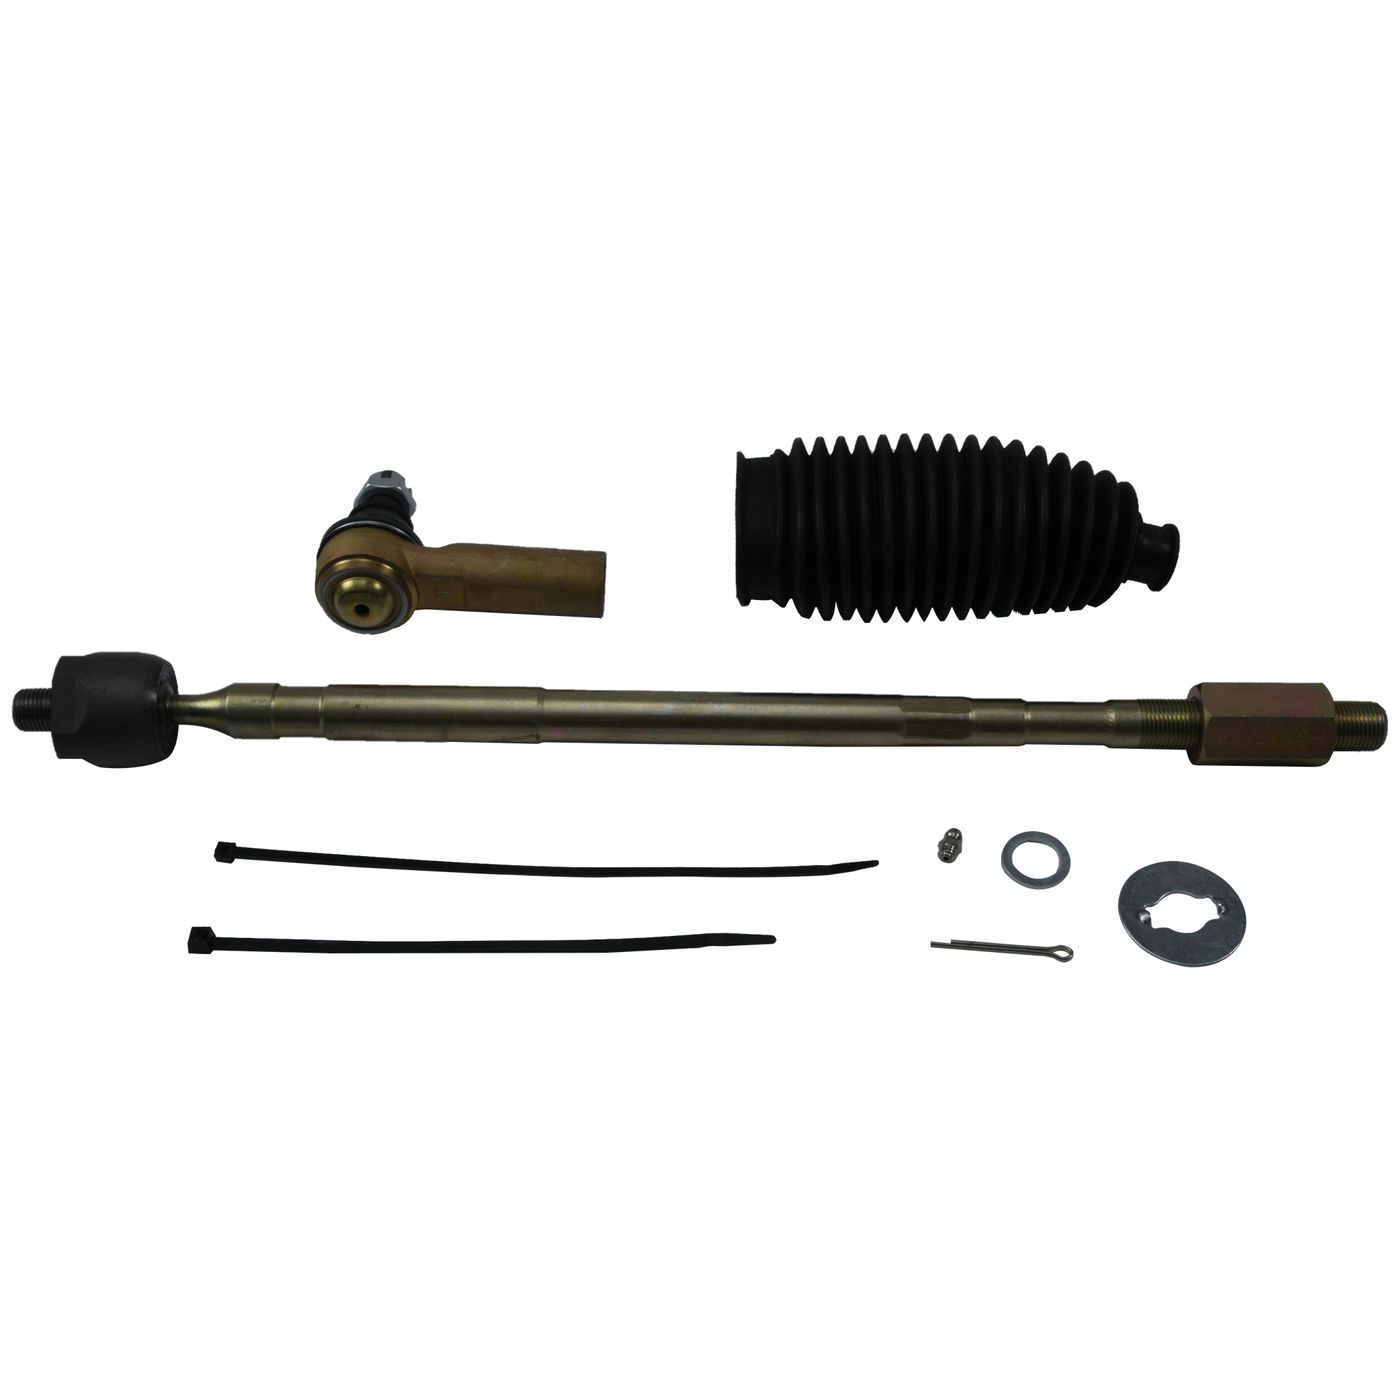 Wrp Tie Rod Ends - WRP511103 image